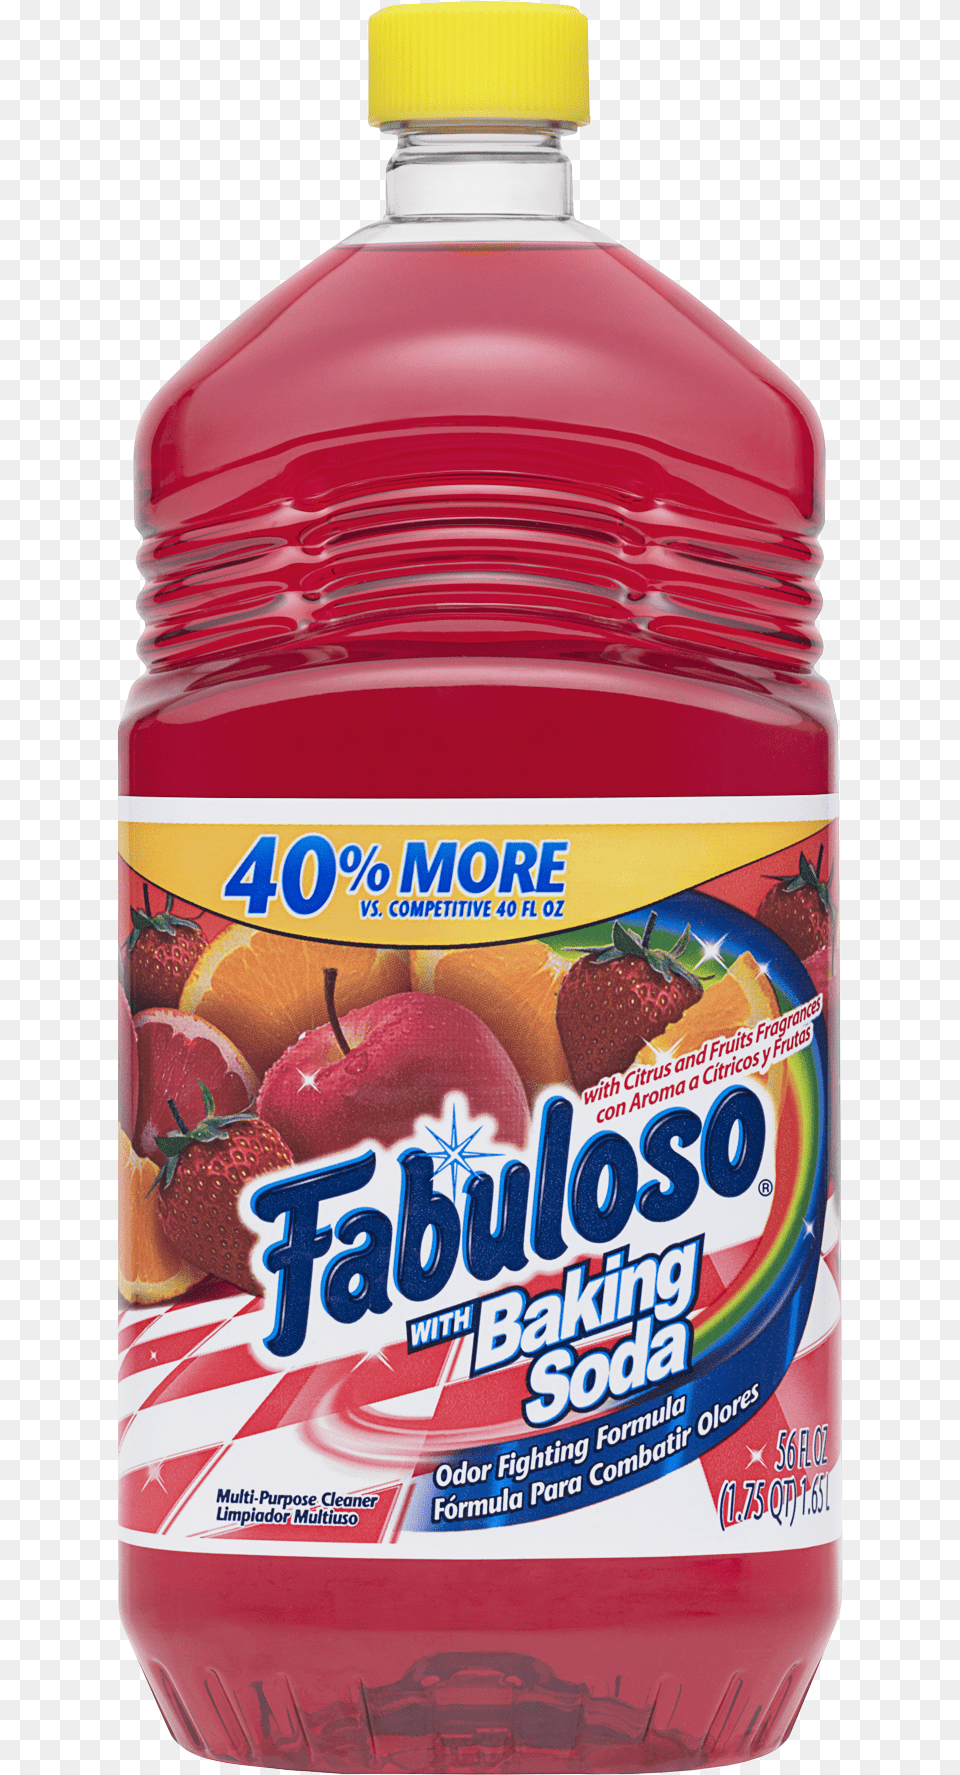 Fabuloso All Purpose Cleaner Baking Soda Fabuloso With Baking Soda All Purpose Cleaner Citrus, Beverage, Juice, Can, Tin Free Png Download